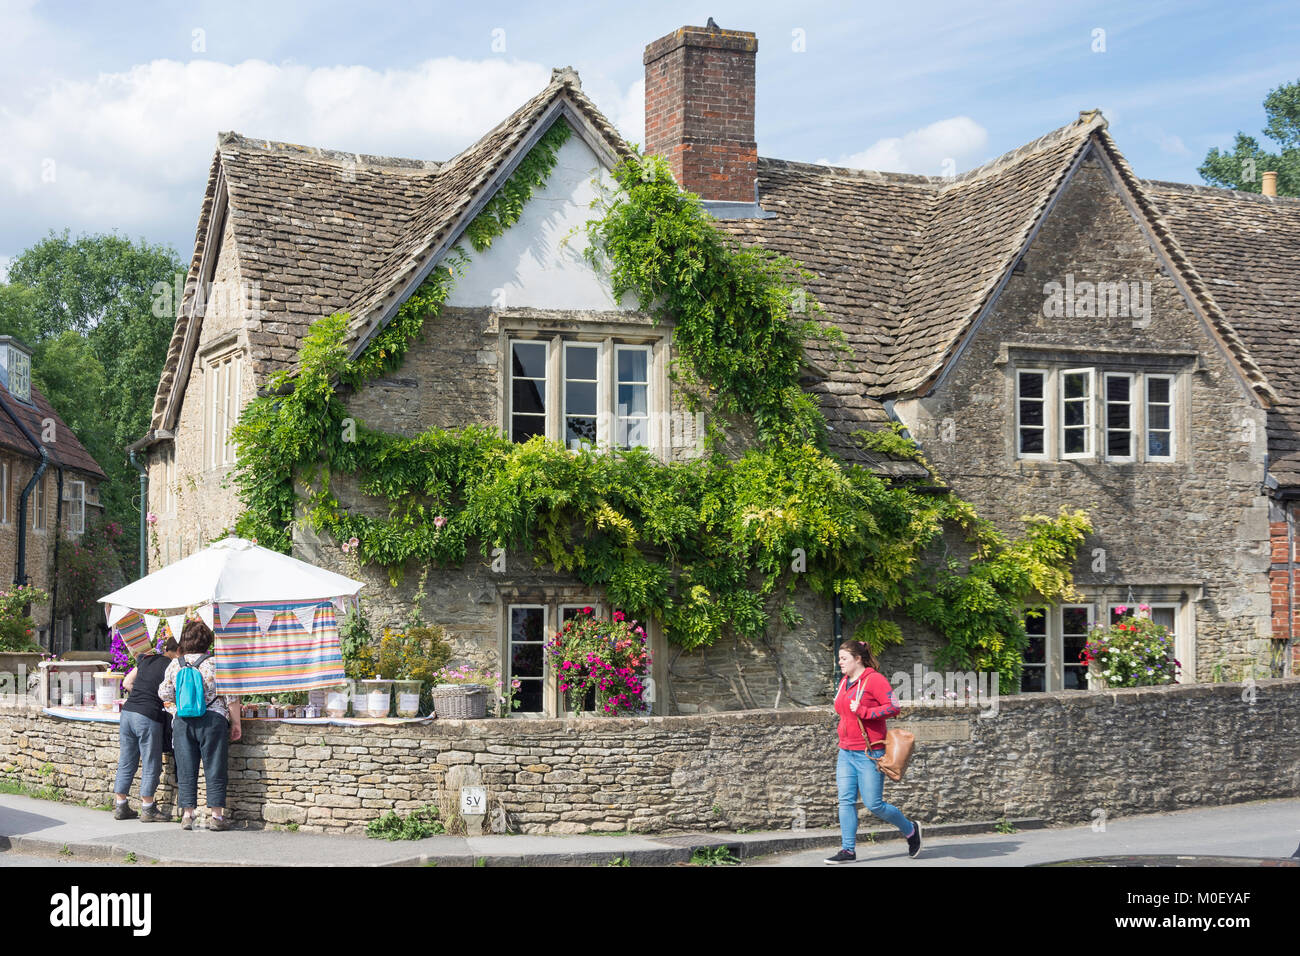 Chalet Période, Church Street, Lacock, Wiltshire, Angleterre, Royaume-Uni Banque D'Images